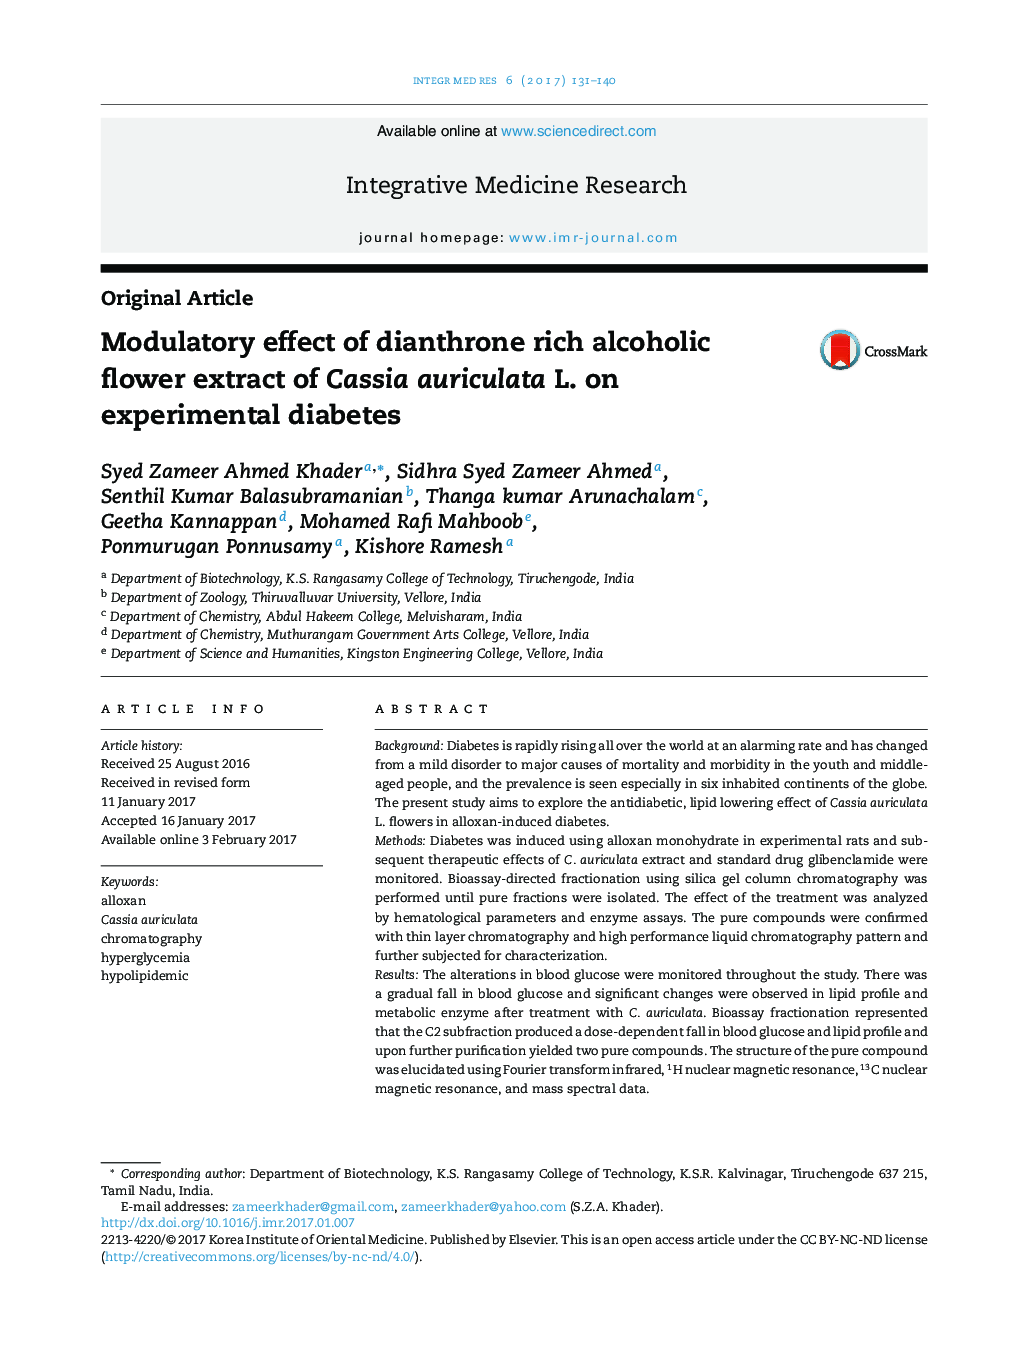 Modulatory effect of dianthrone rich alcoholic flower extract of Cassia auriculata L. on experimental diabetes